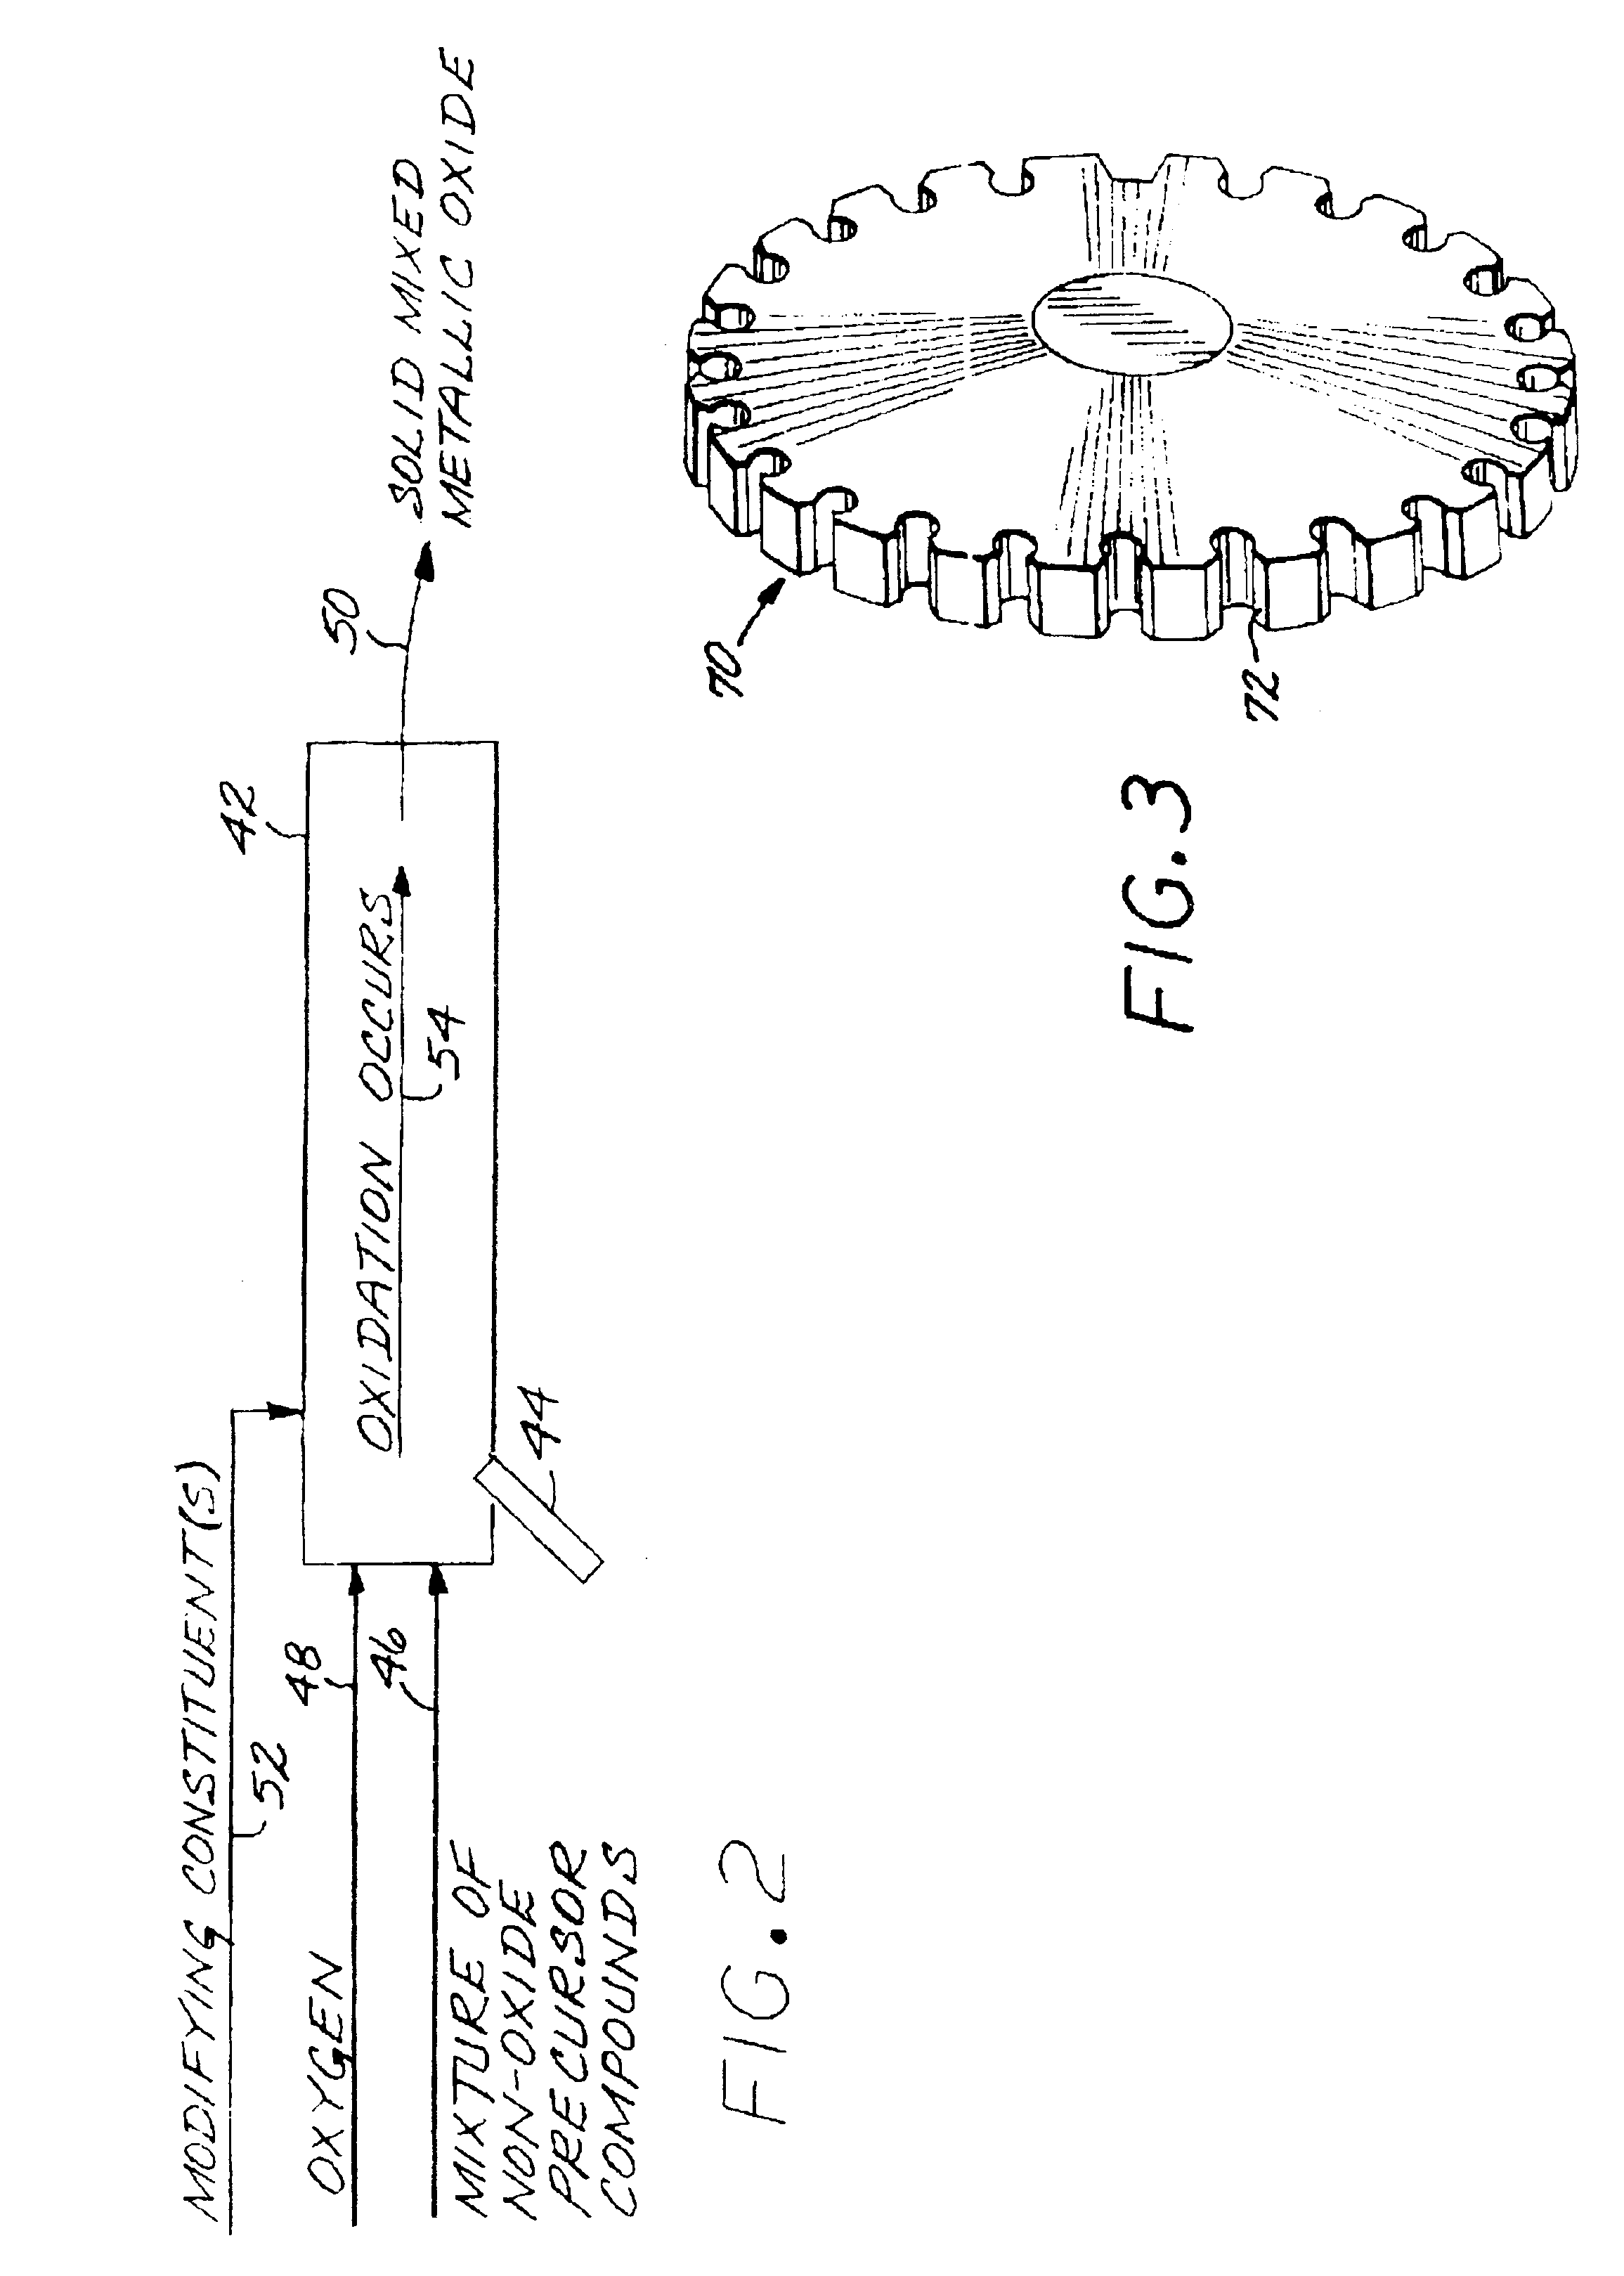 Method for producing a metallic alloy by the oxidation and chemical reduction of gaseous non-oxide precursor compounds